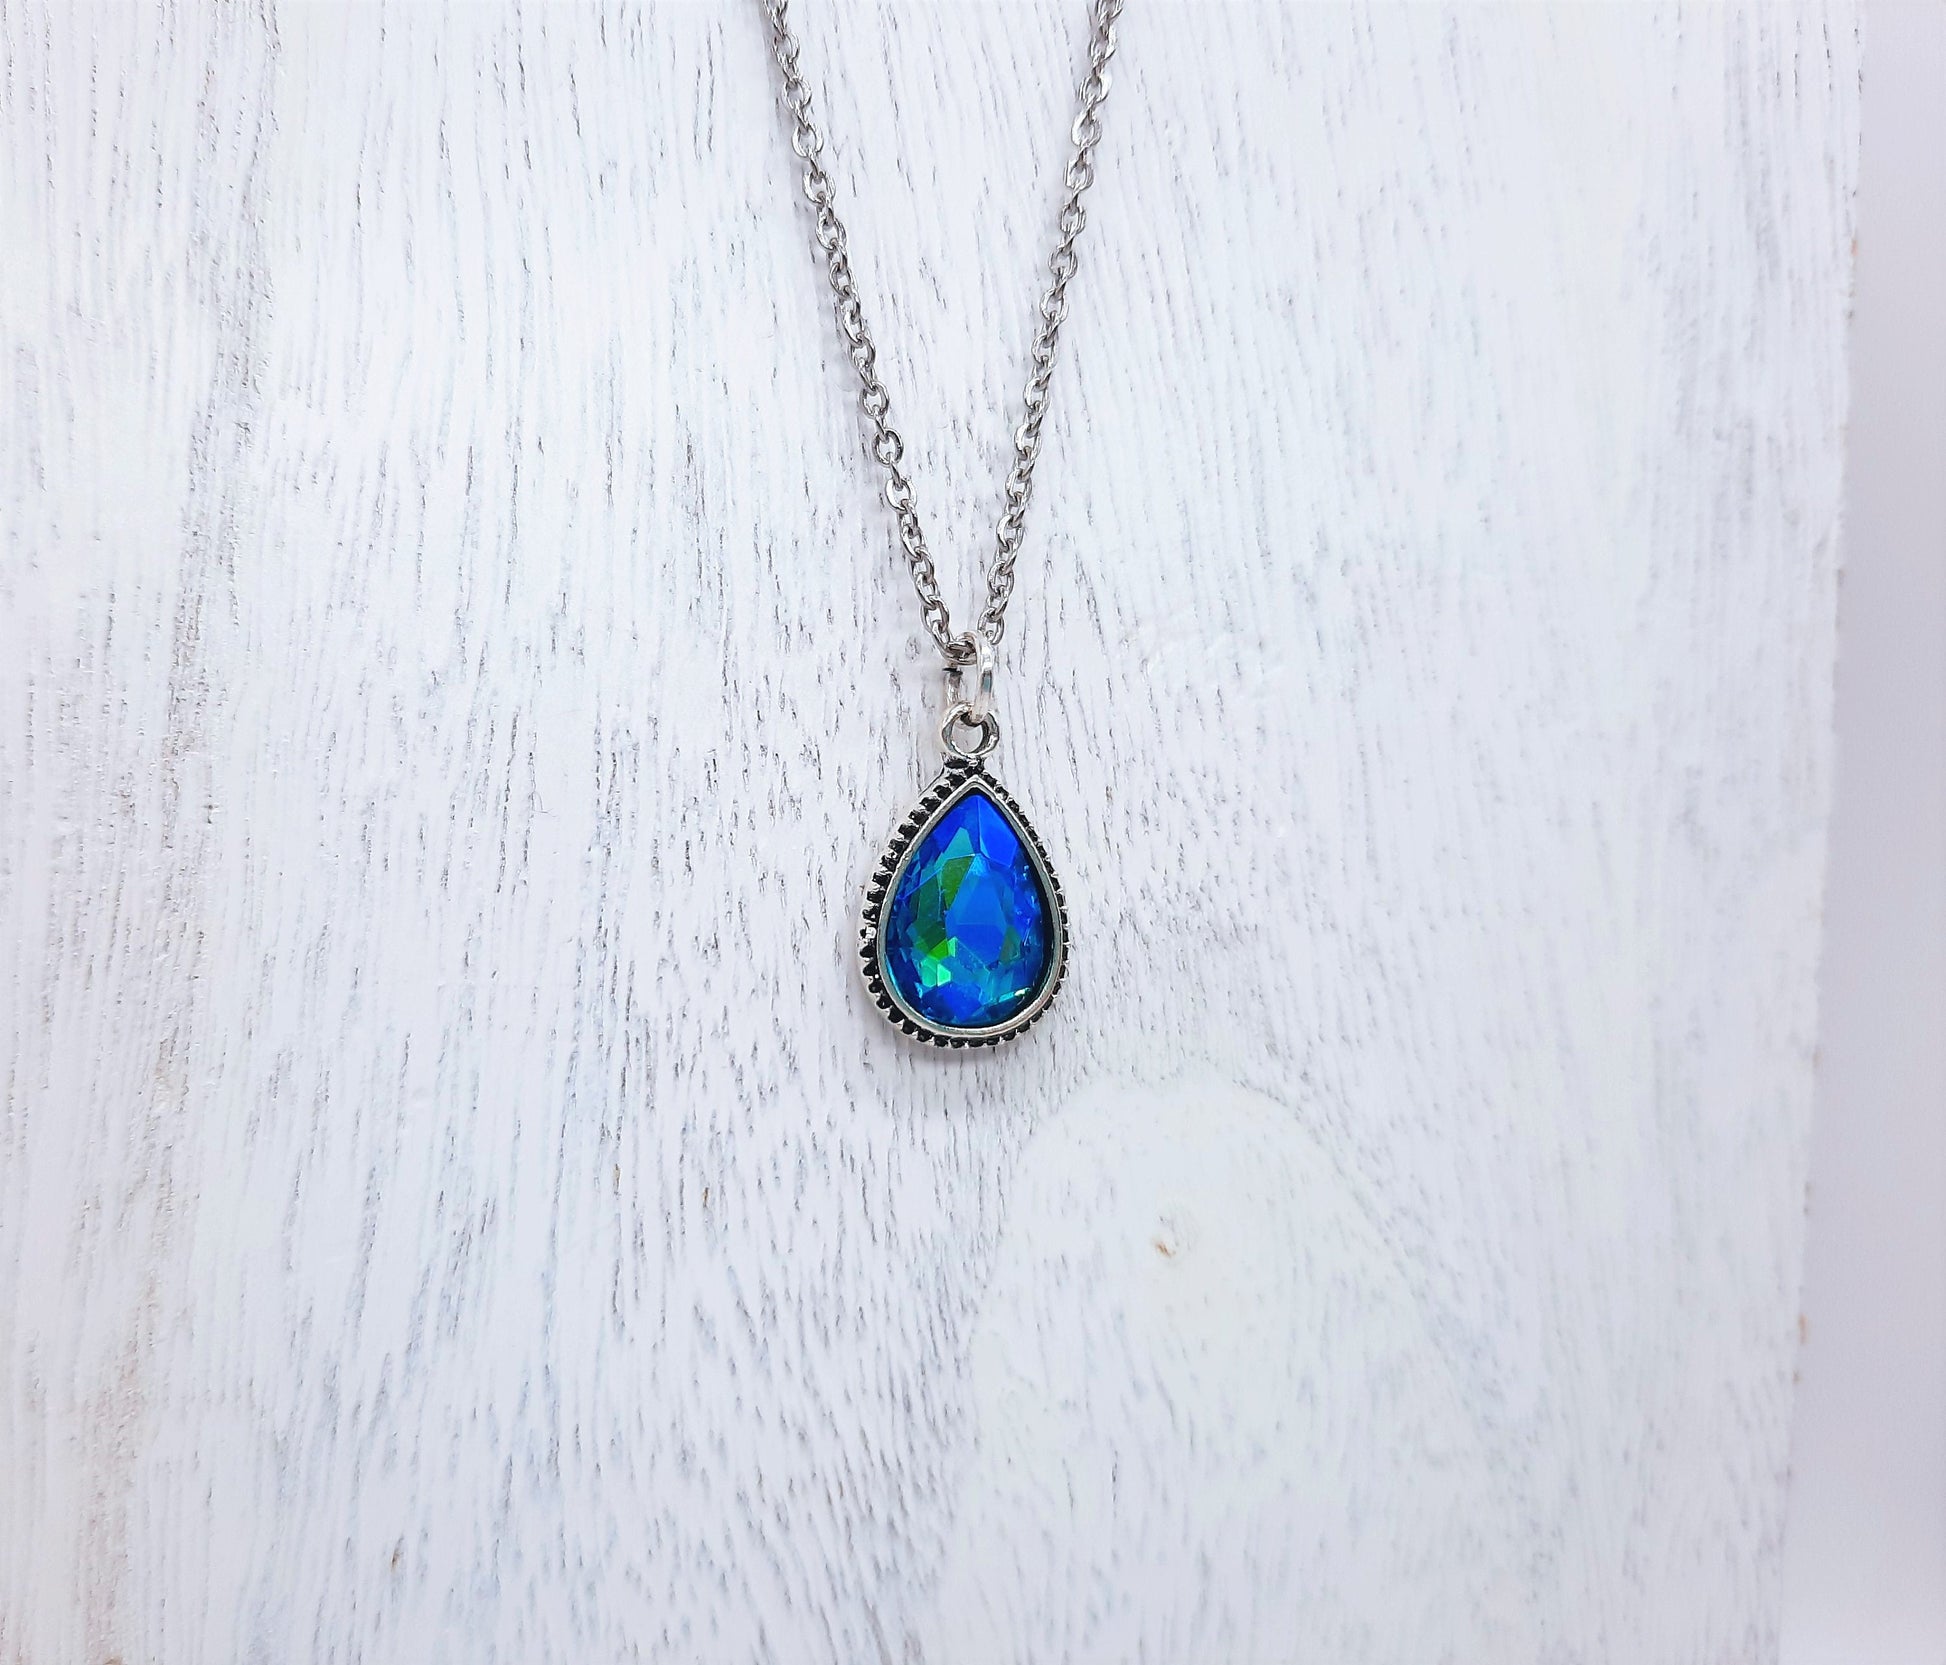 Handmade / Handcrafted Antiqued Silver Teal Blue Rhinestone Teardrop Pendant Necklace, 18" Stainless Steel Chain, Hypoallergenic